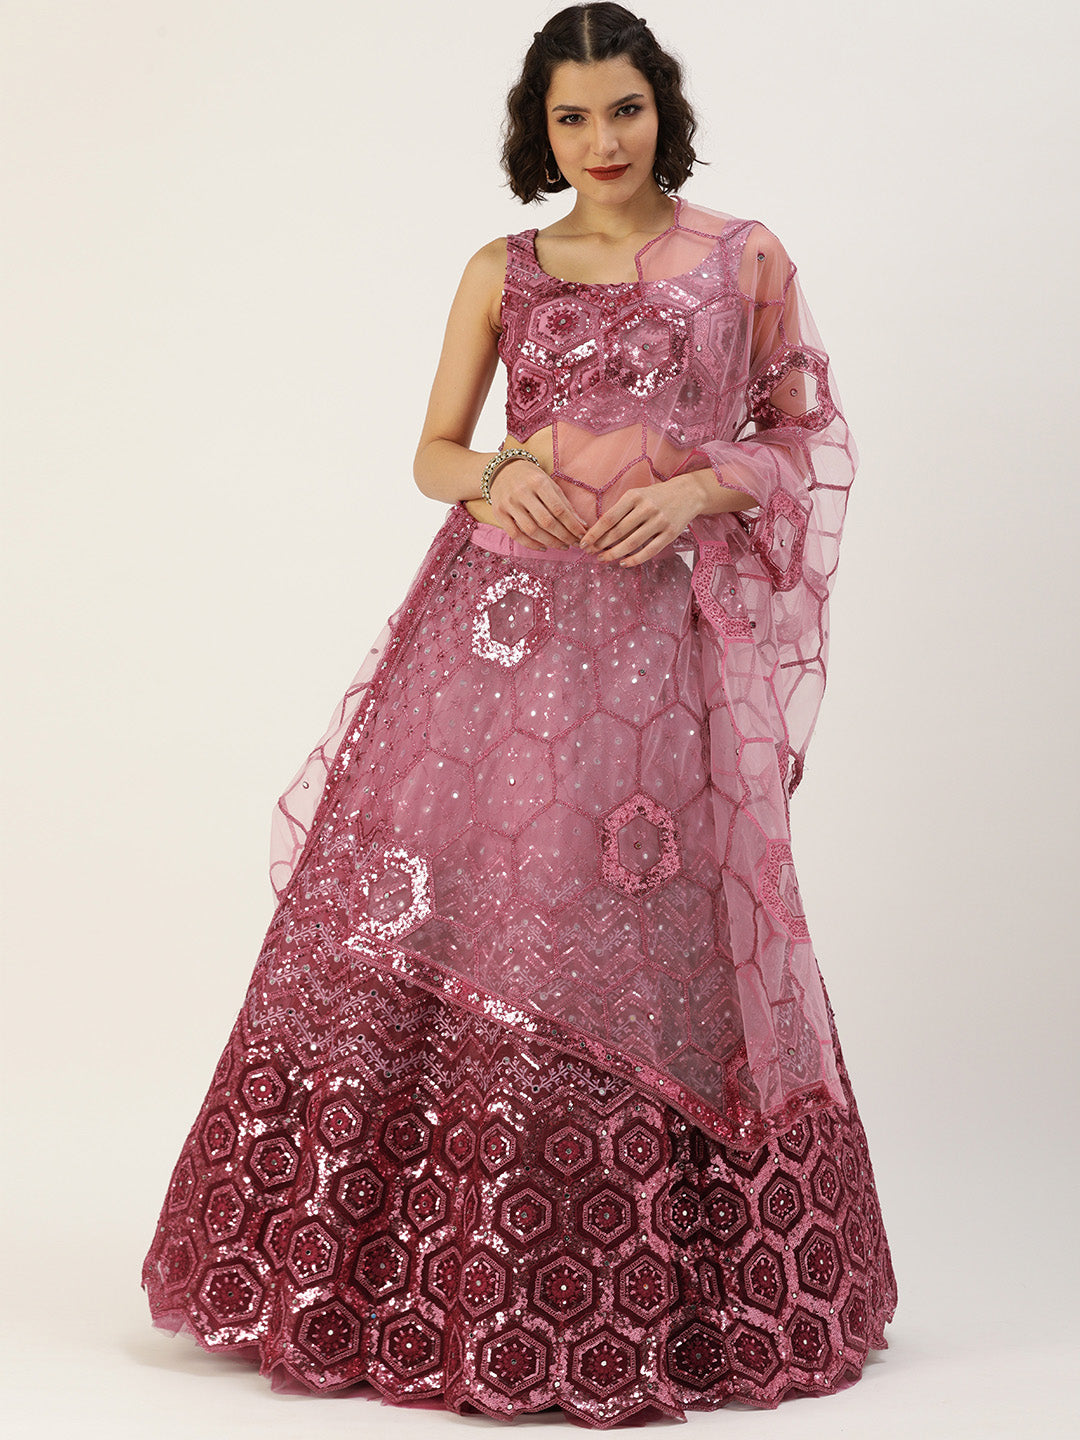 Women's Burgundy Shading Net Sequince Embroidered Lehenga & Blouse With Dupatta - Royal Dwells